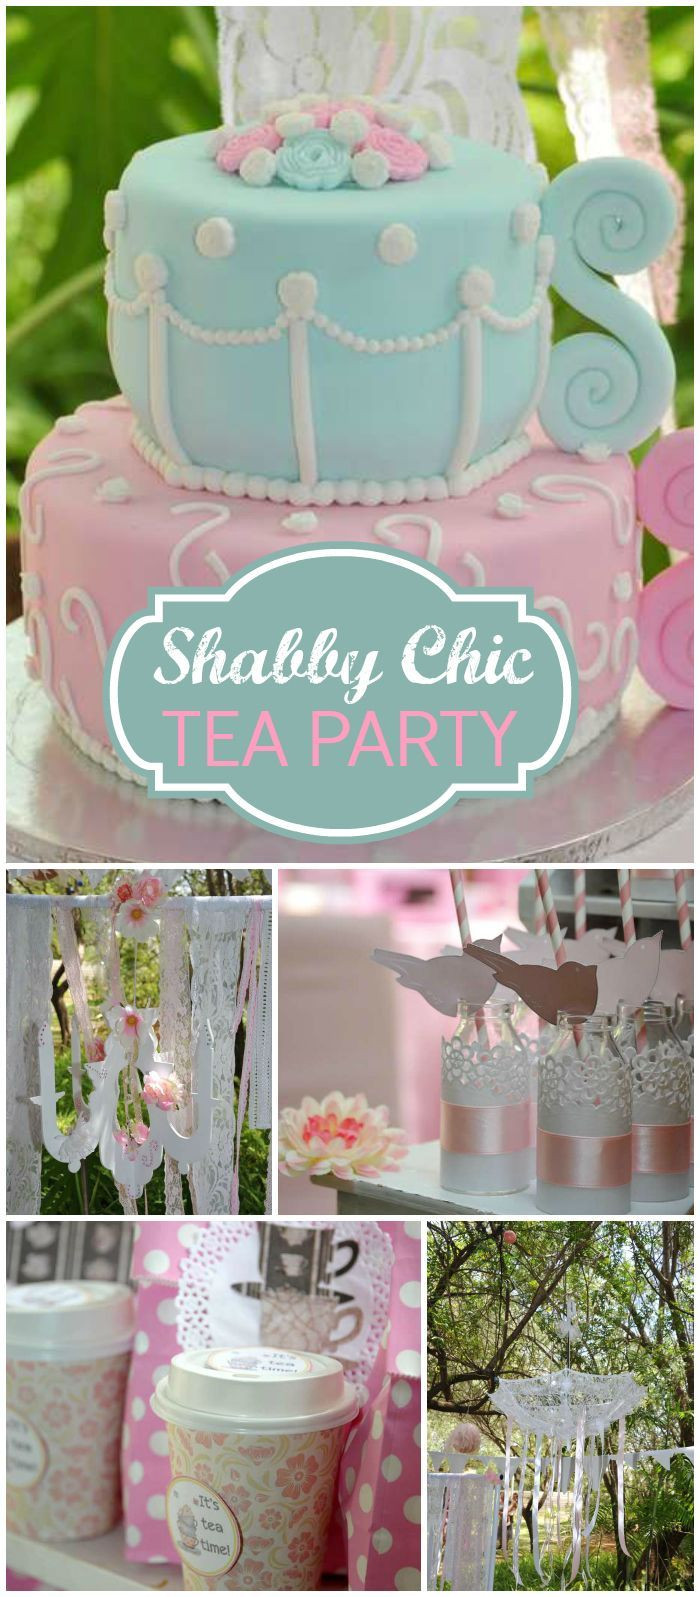 Shabby Chic Tea Party Ideas
 78 images about Little Girls Tea Party Ideas on Pinterest